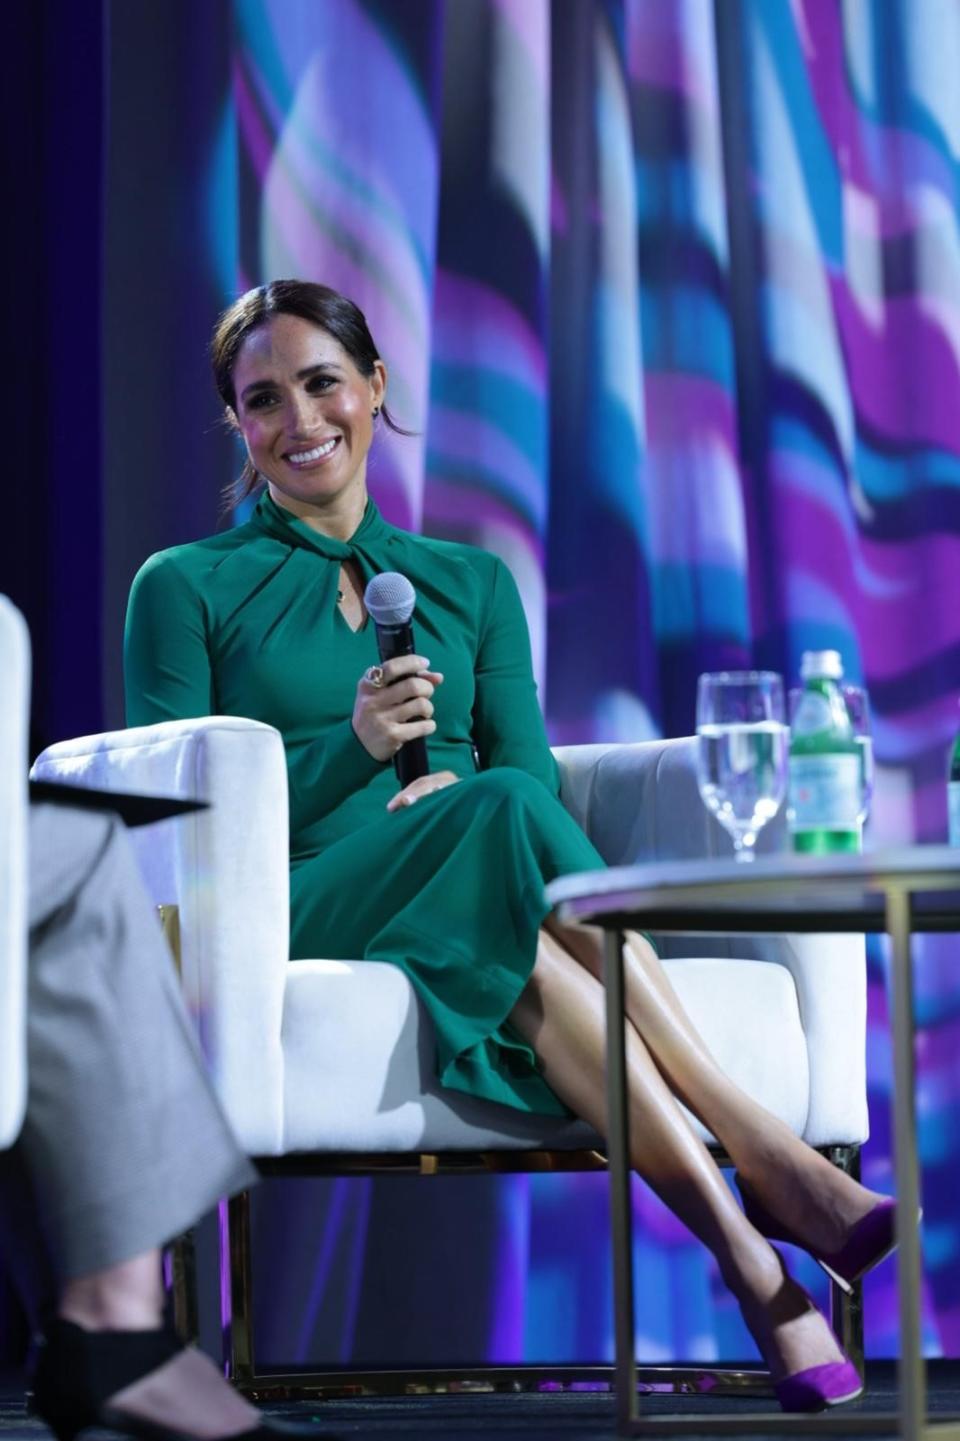 Meghan at the Women’s Fund event in Indiana (Archewell/Nathaniel Edmunds)